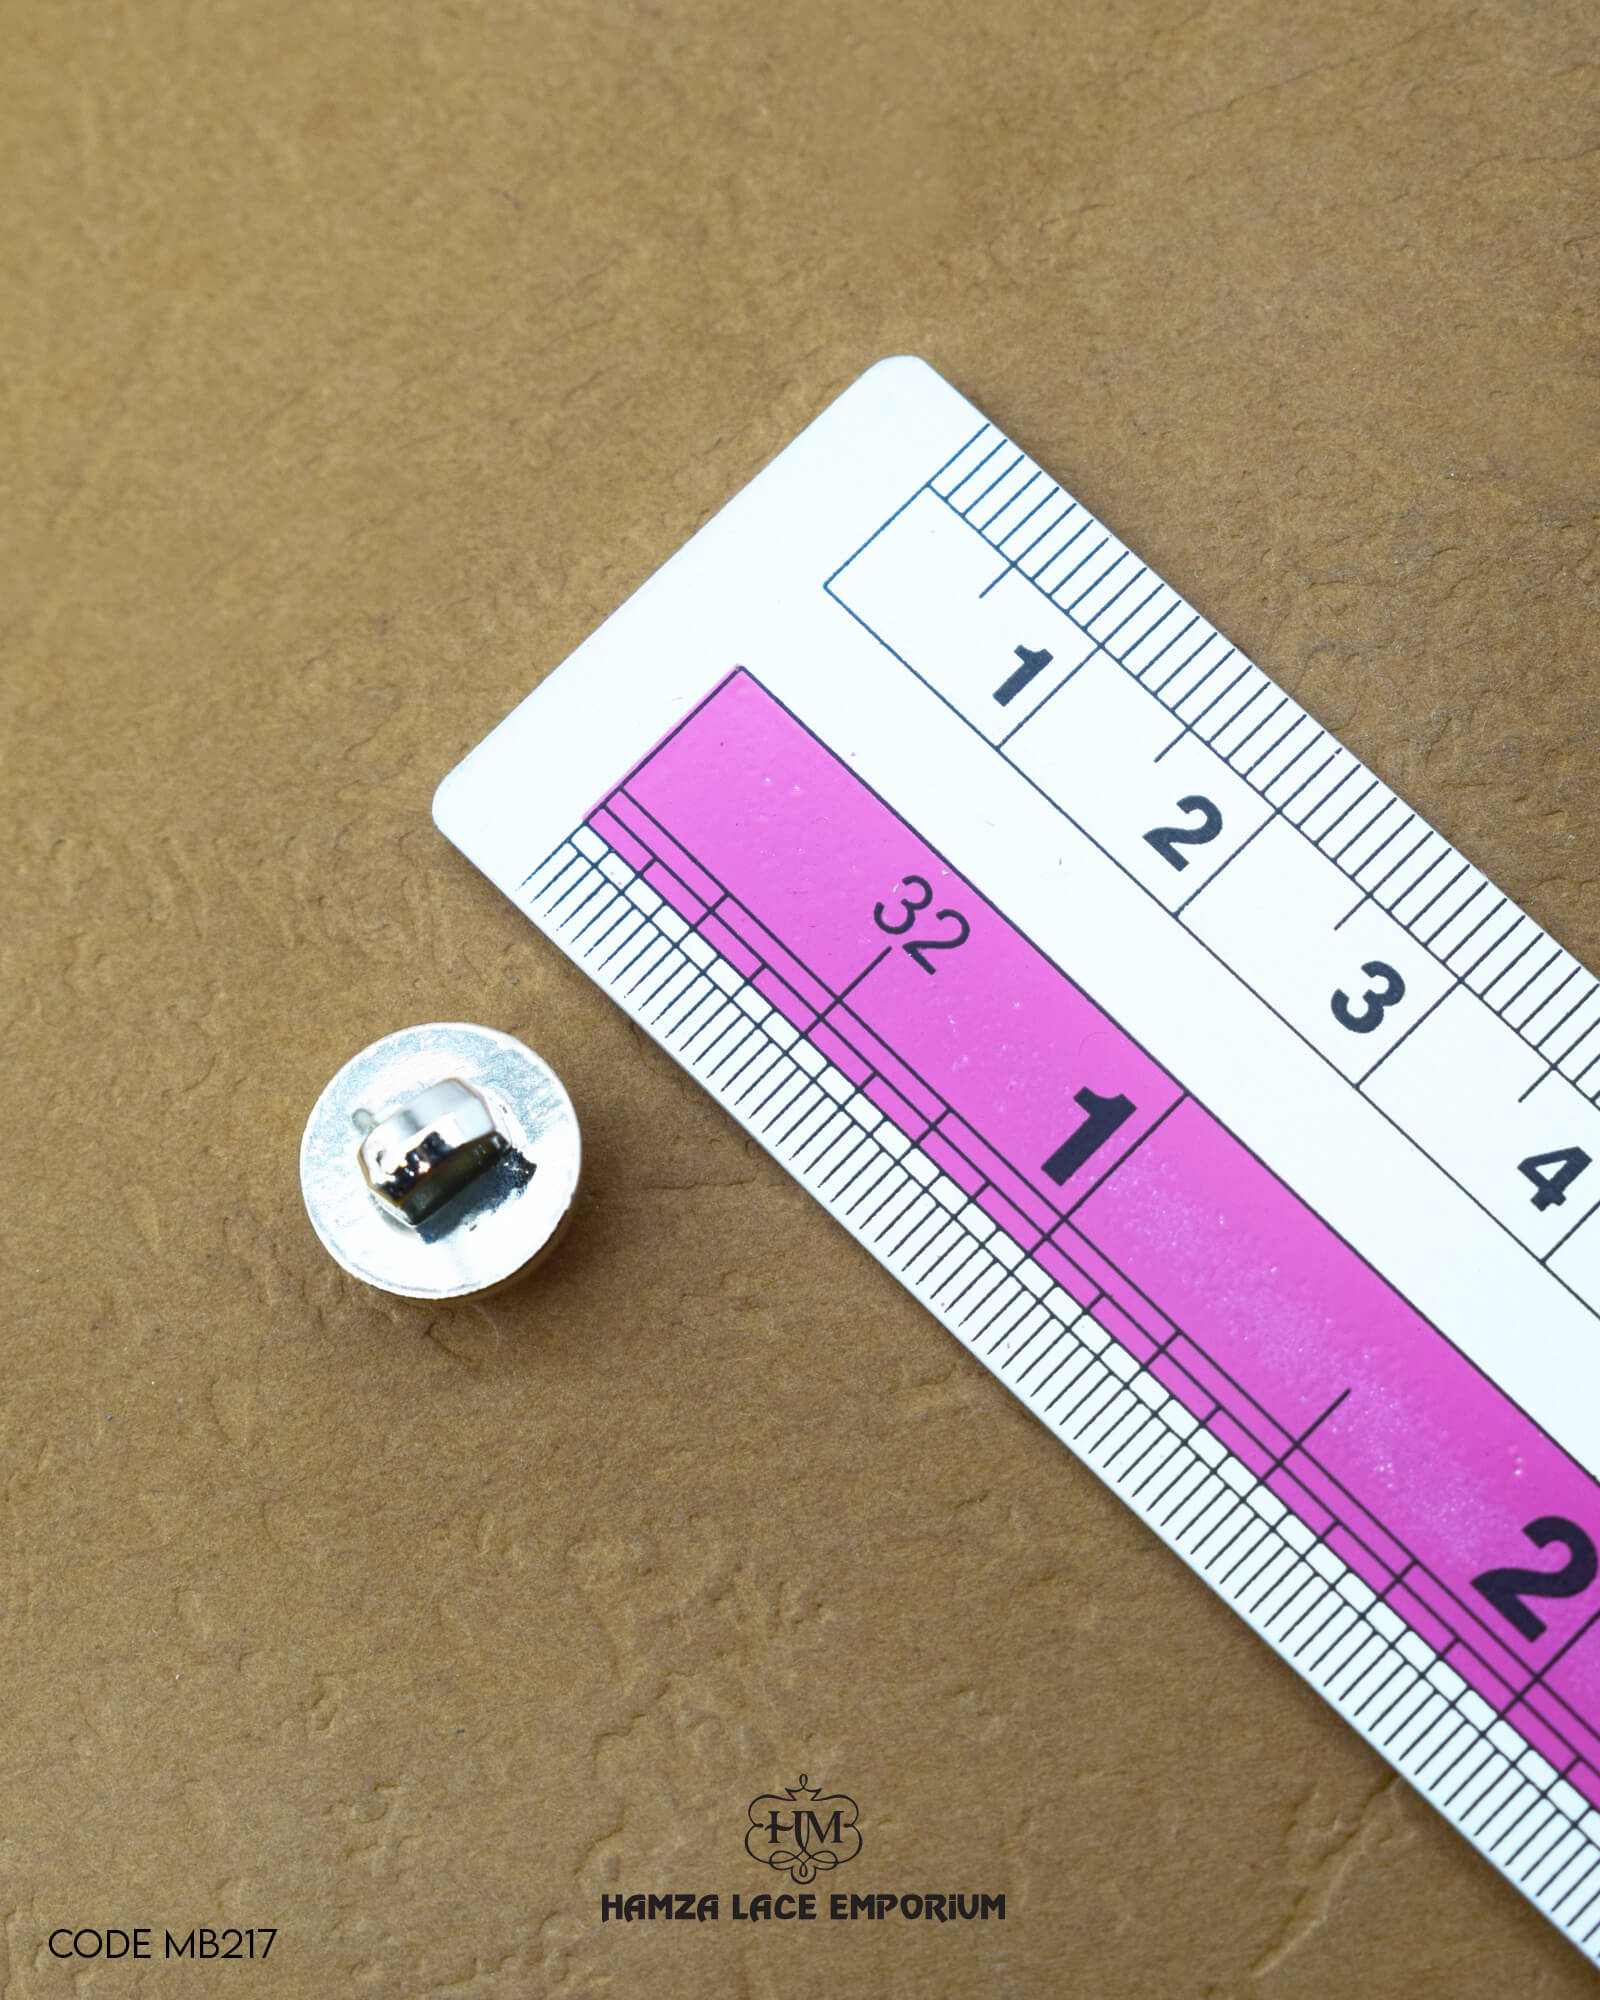 Size of the 'Loop Shape Plastic Button MB217' is given with the help of a ruler